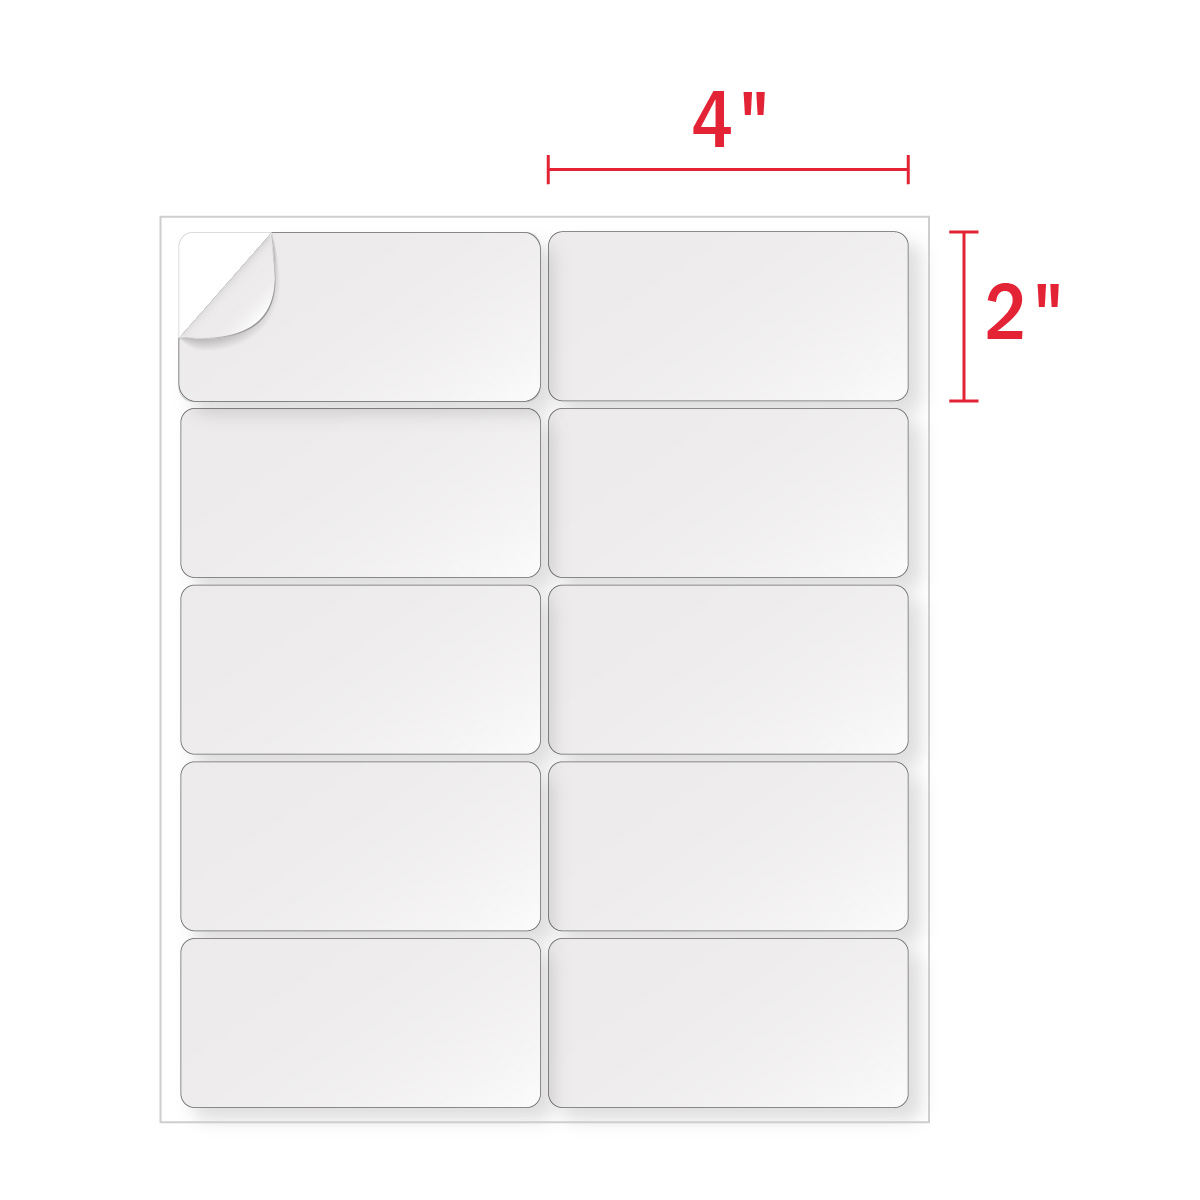 2x4 Labels (Blank Rectangle White Paper) 10 Labels Per Sheet